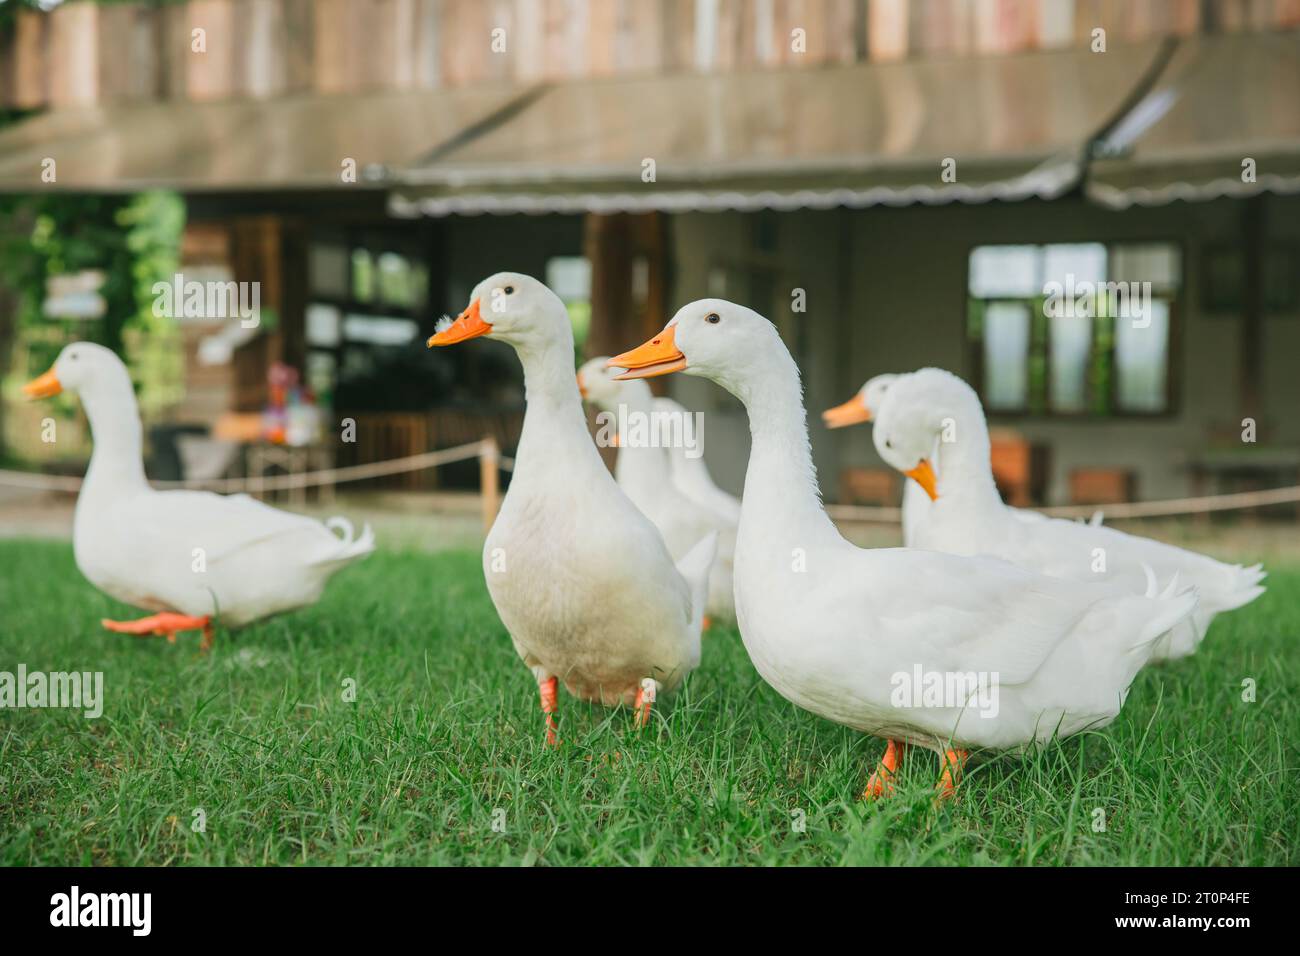 Group of Netherlands Call Duck Breed Animal Pet in The Garden Farm Outdoors most Cute lovely ducks Stock Photo